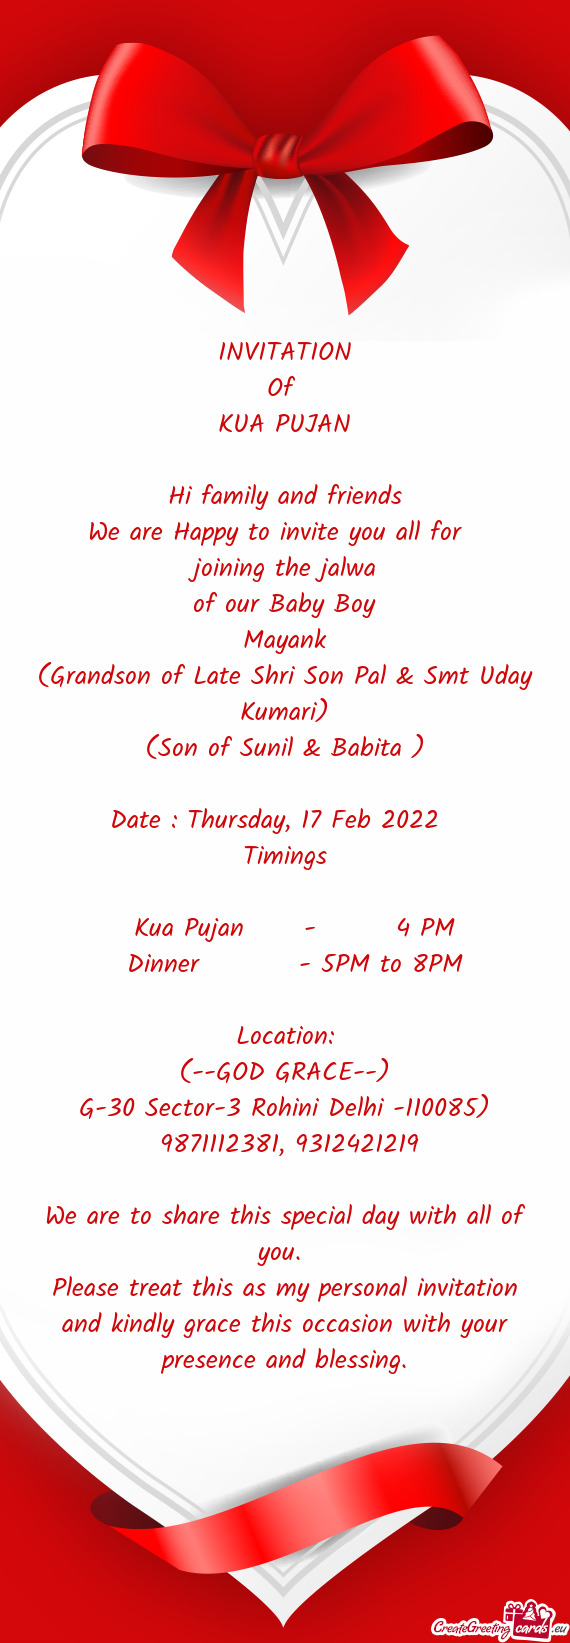 INVITATION
 Of 
 KUA PUJAN
 
 Hi family and friends
 We are Happy to invite you all for 
 joining